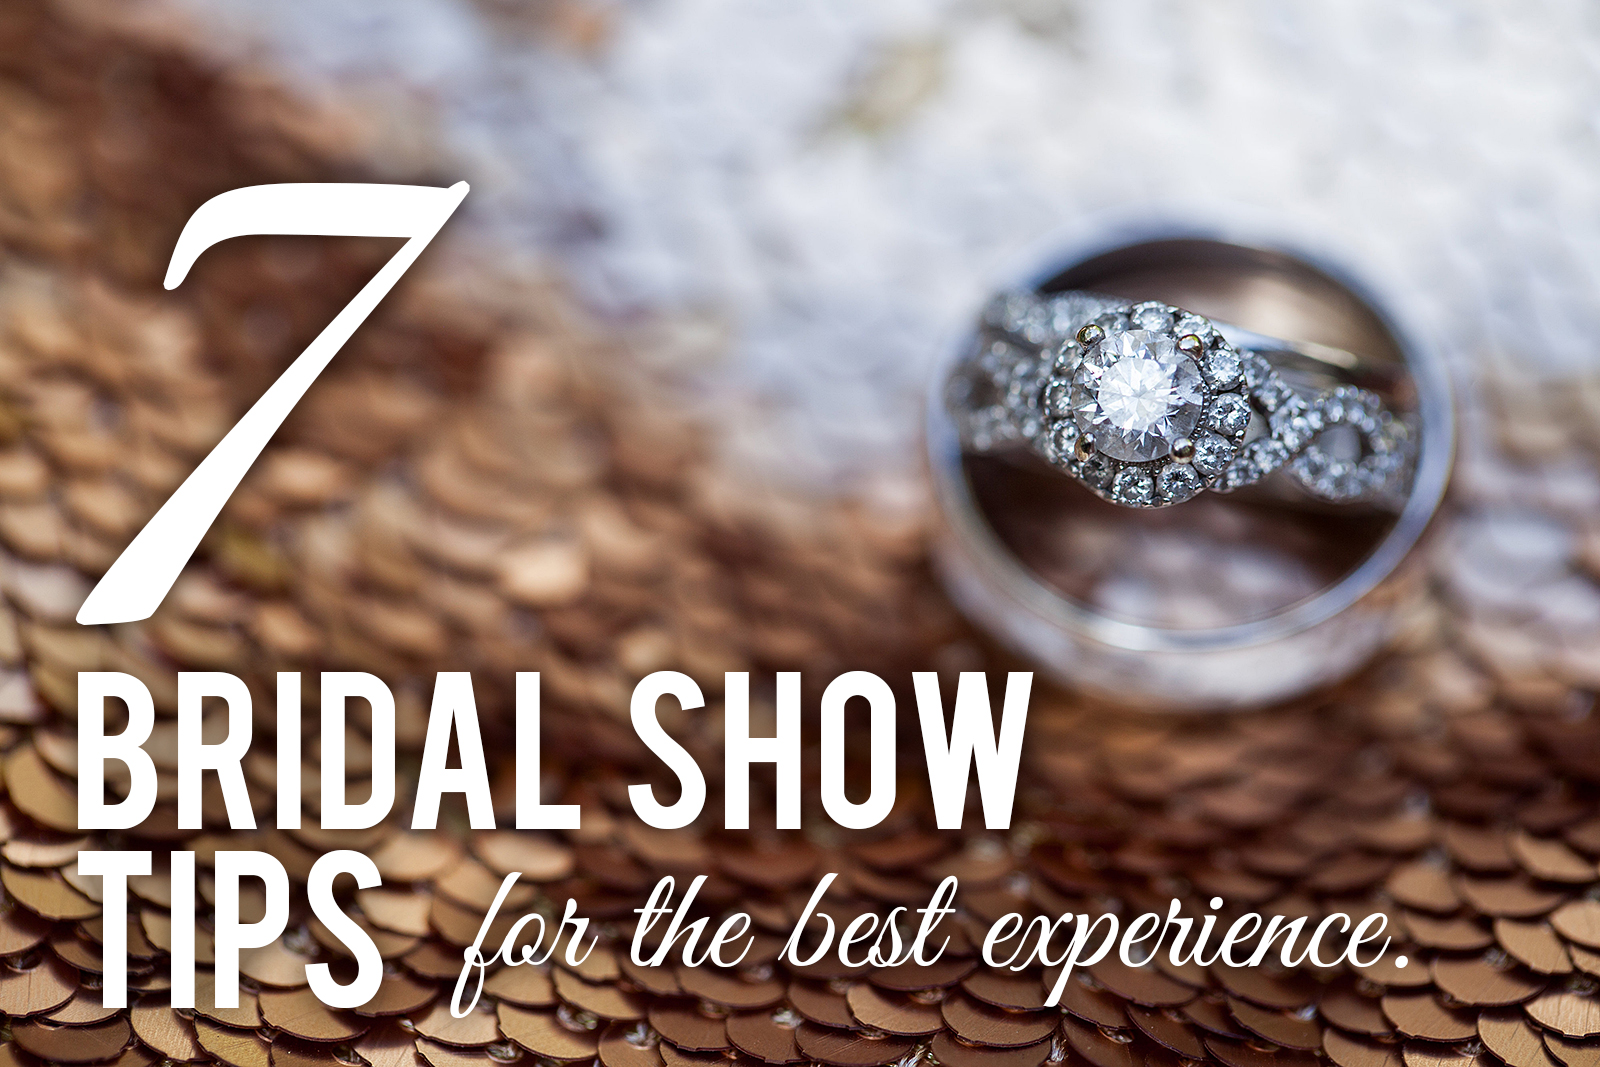 7 Bridal Show Tips for the Best Experience